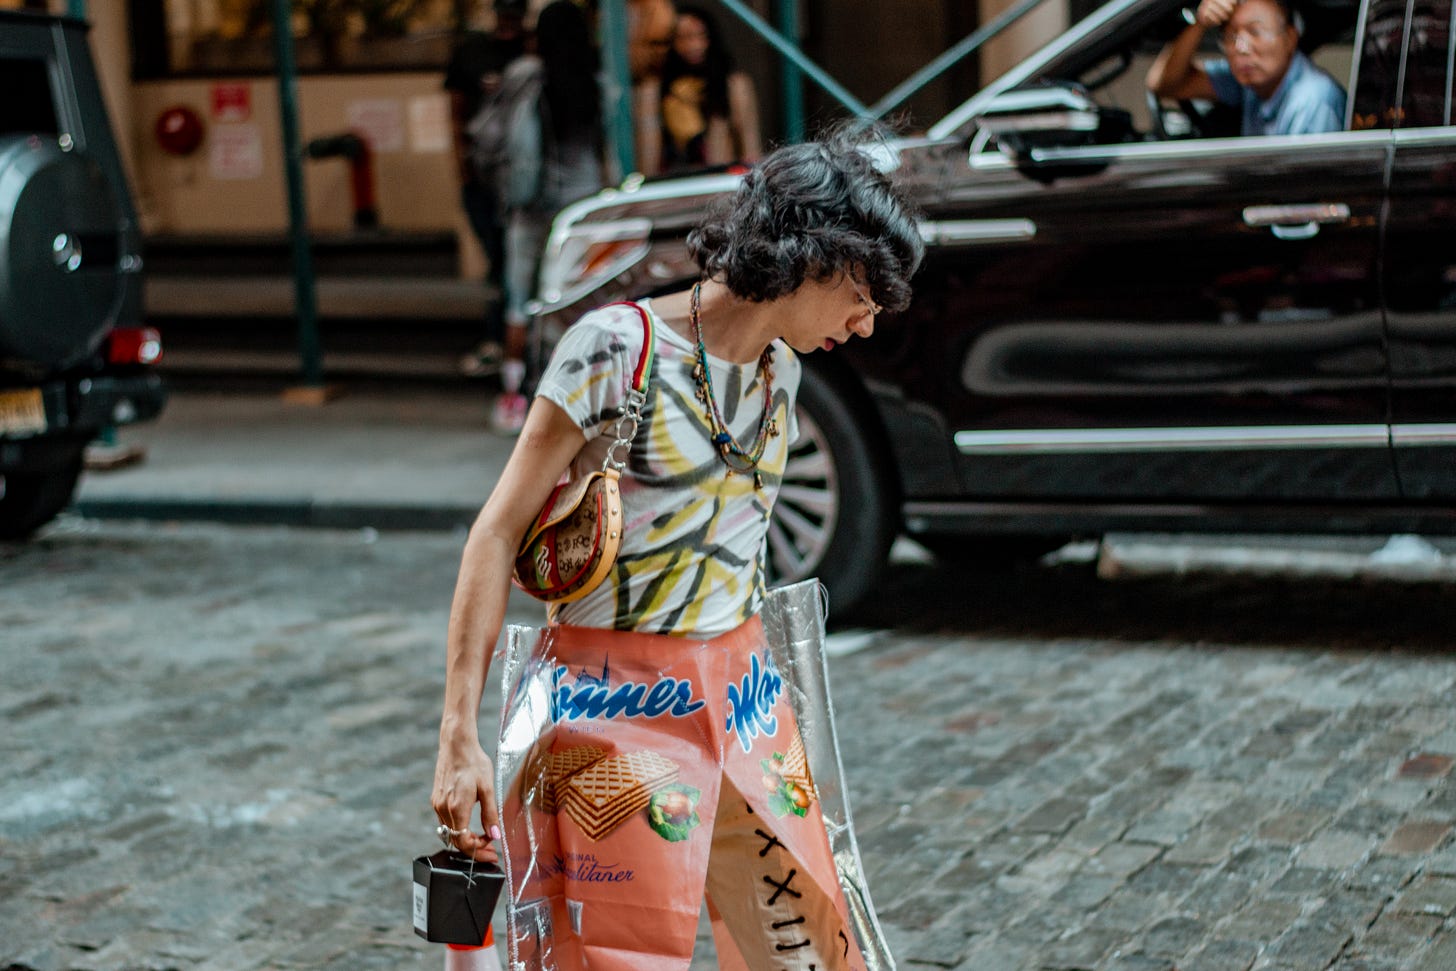  A man in his creative costume (pants printed with wafer brand) in New York: A photo by David Elikwu